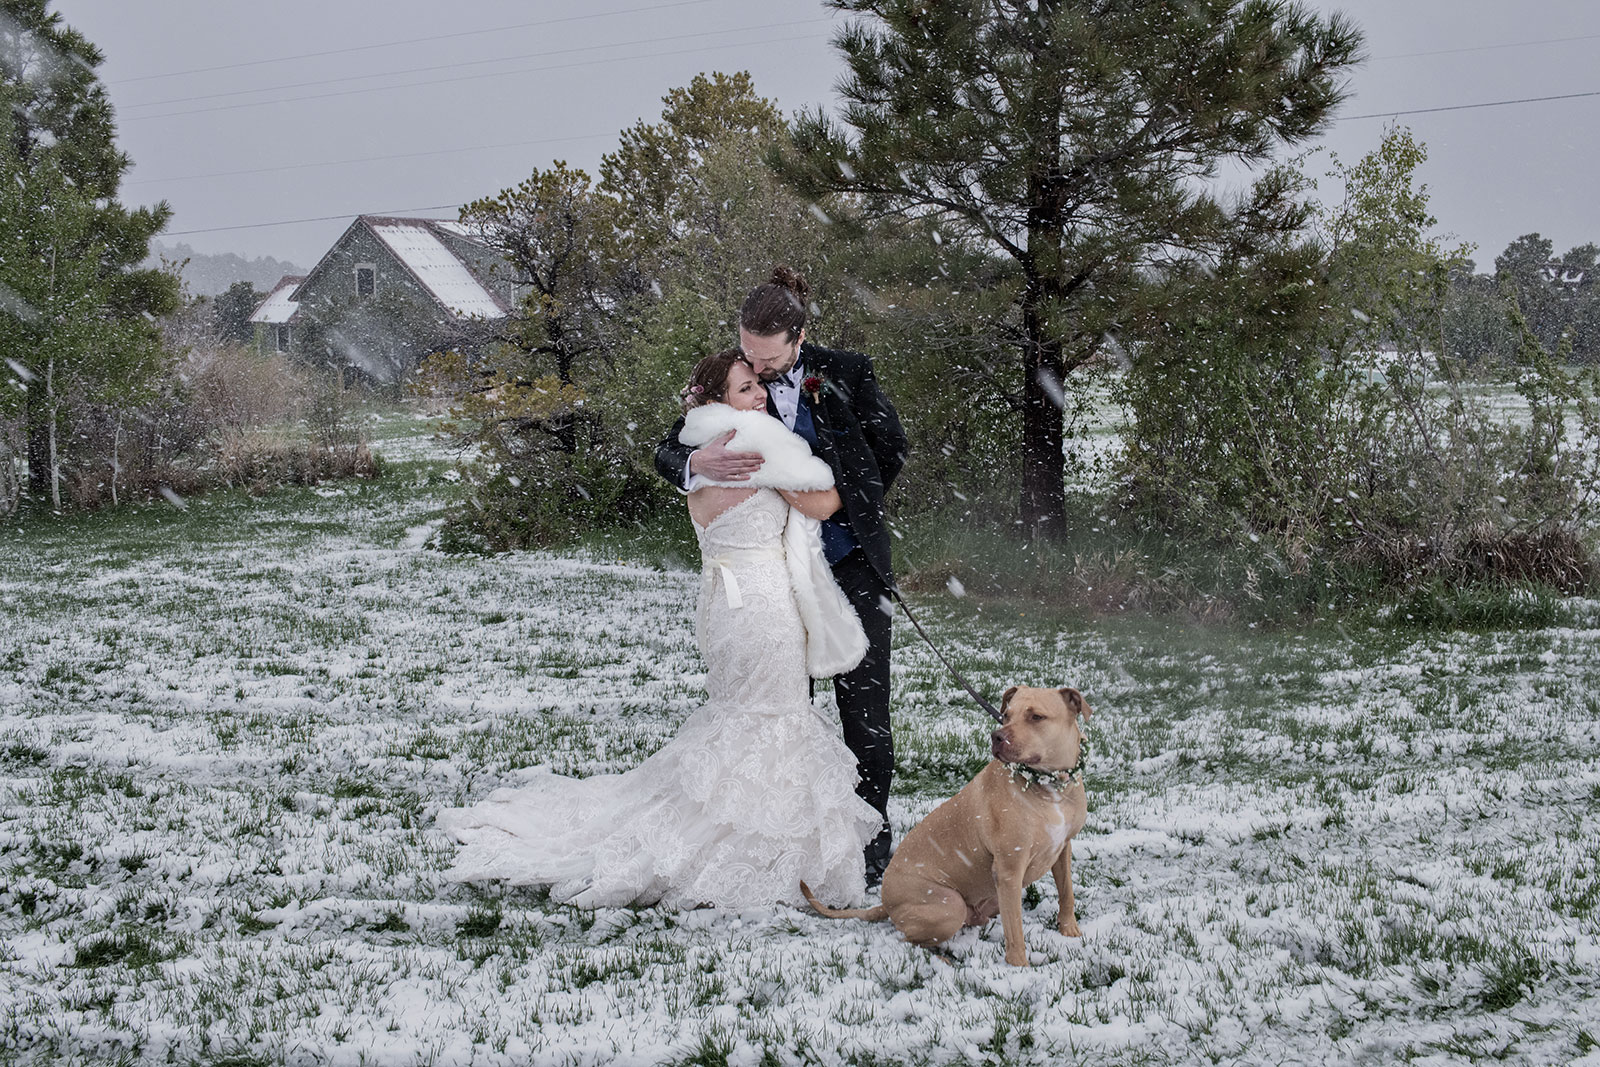 A Moab wedding up in the mountains with snow.